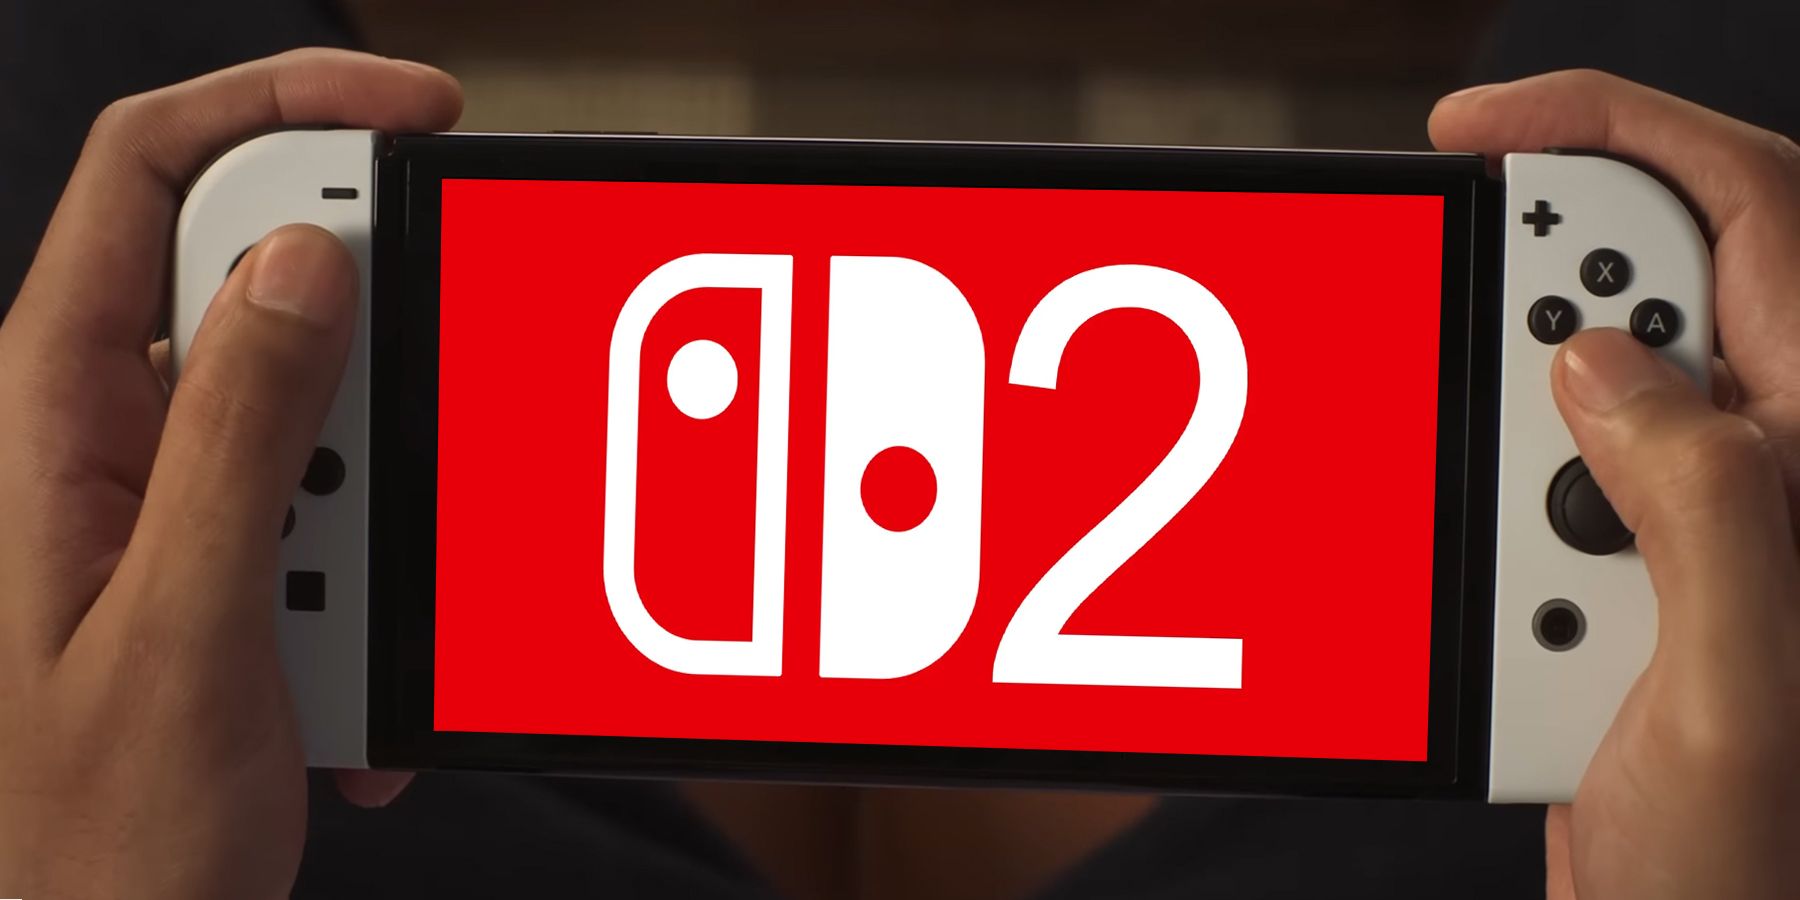 Nintendo Switch 2 Revealed SOON?! Plus More on the Power! 